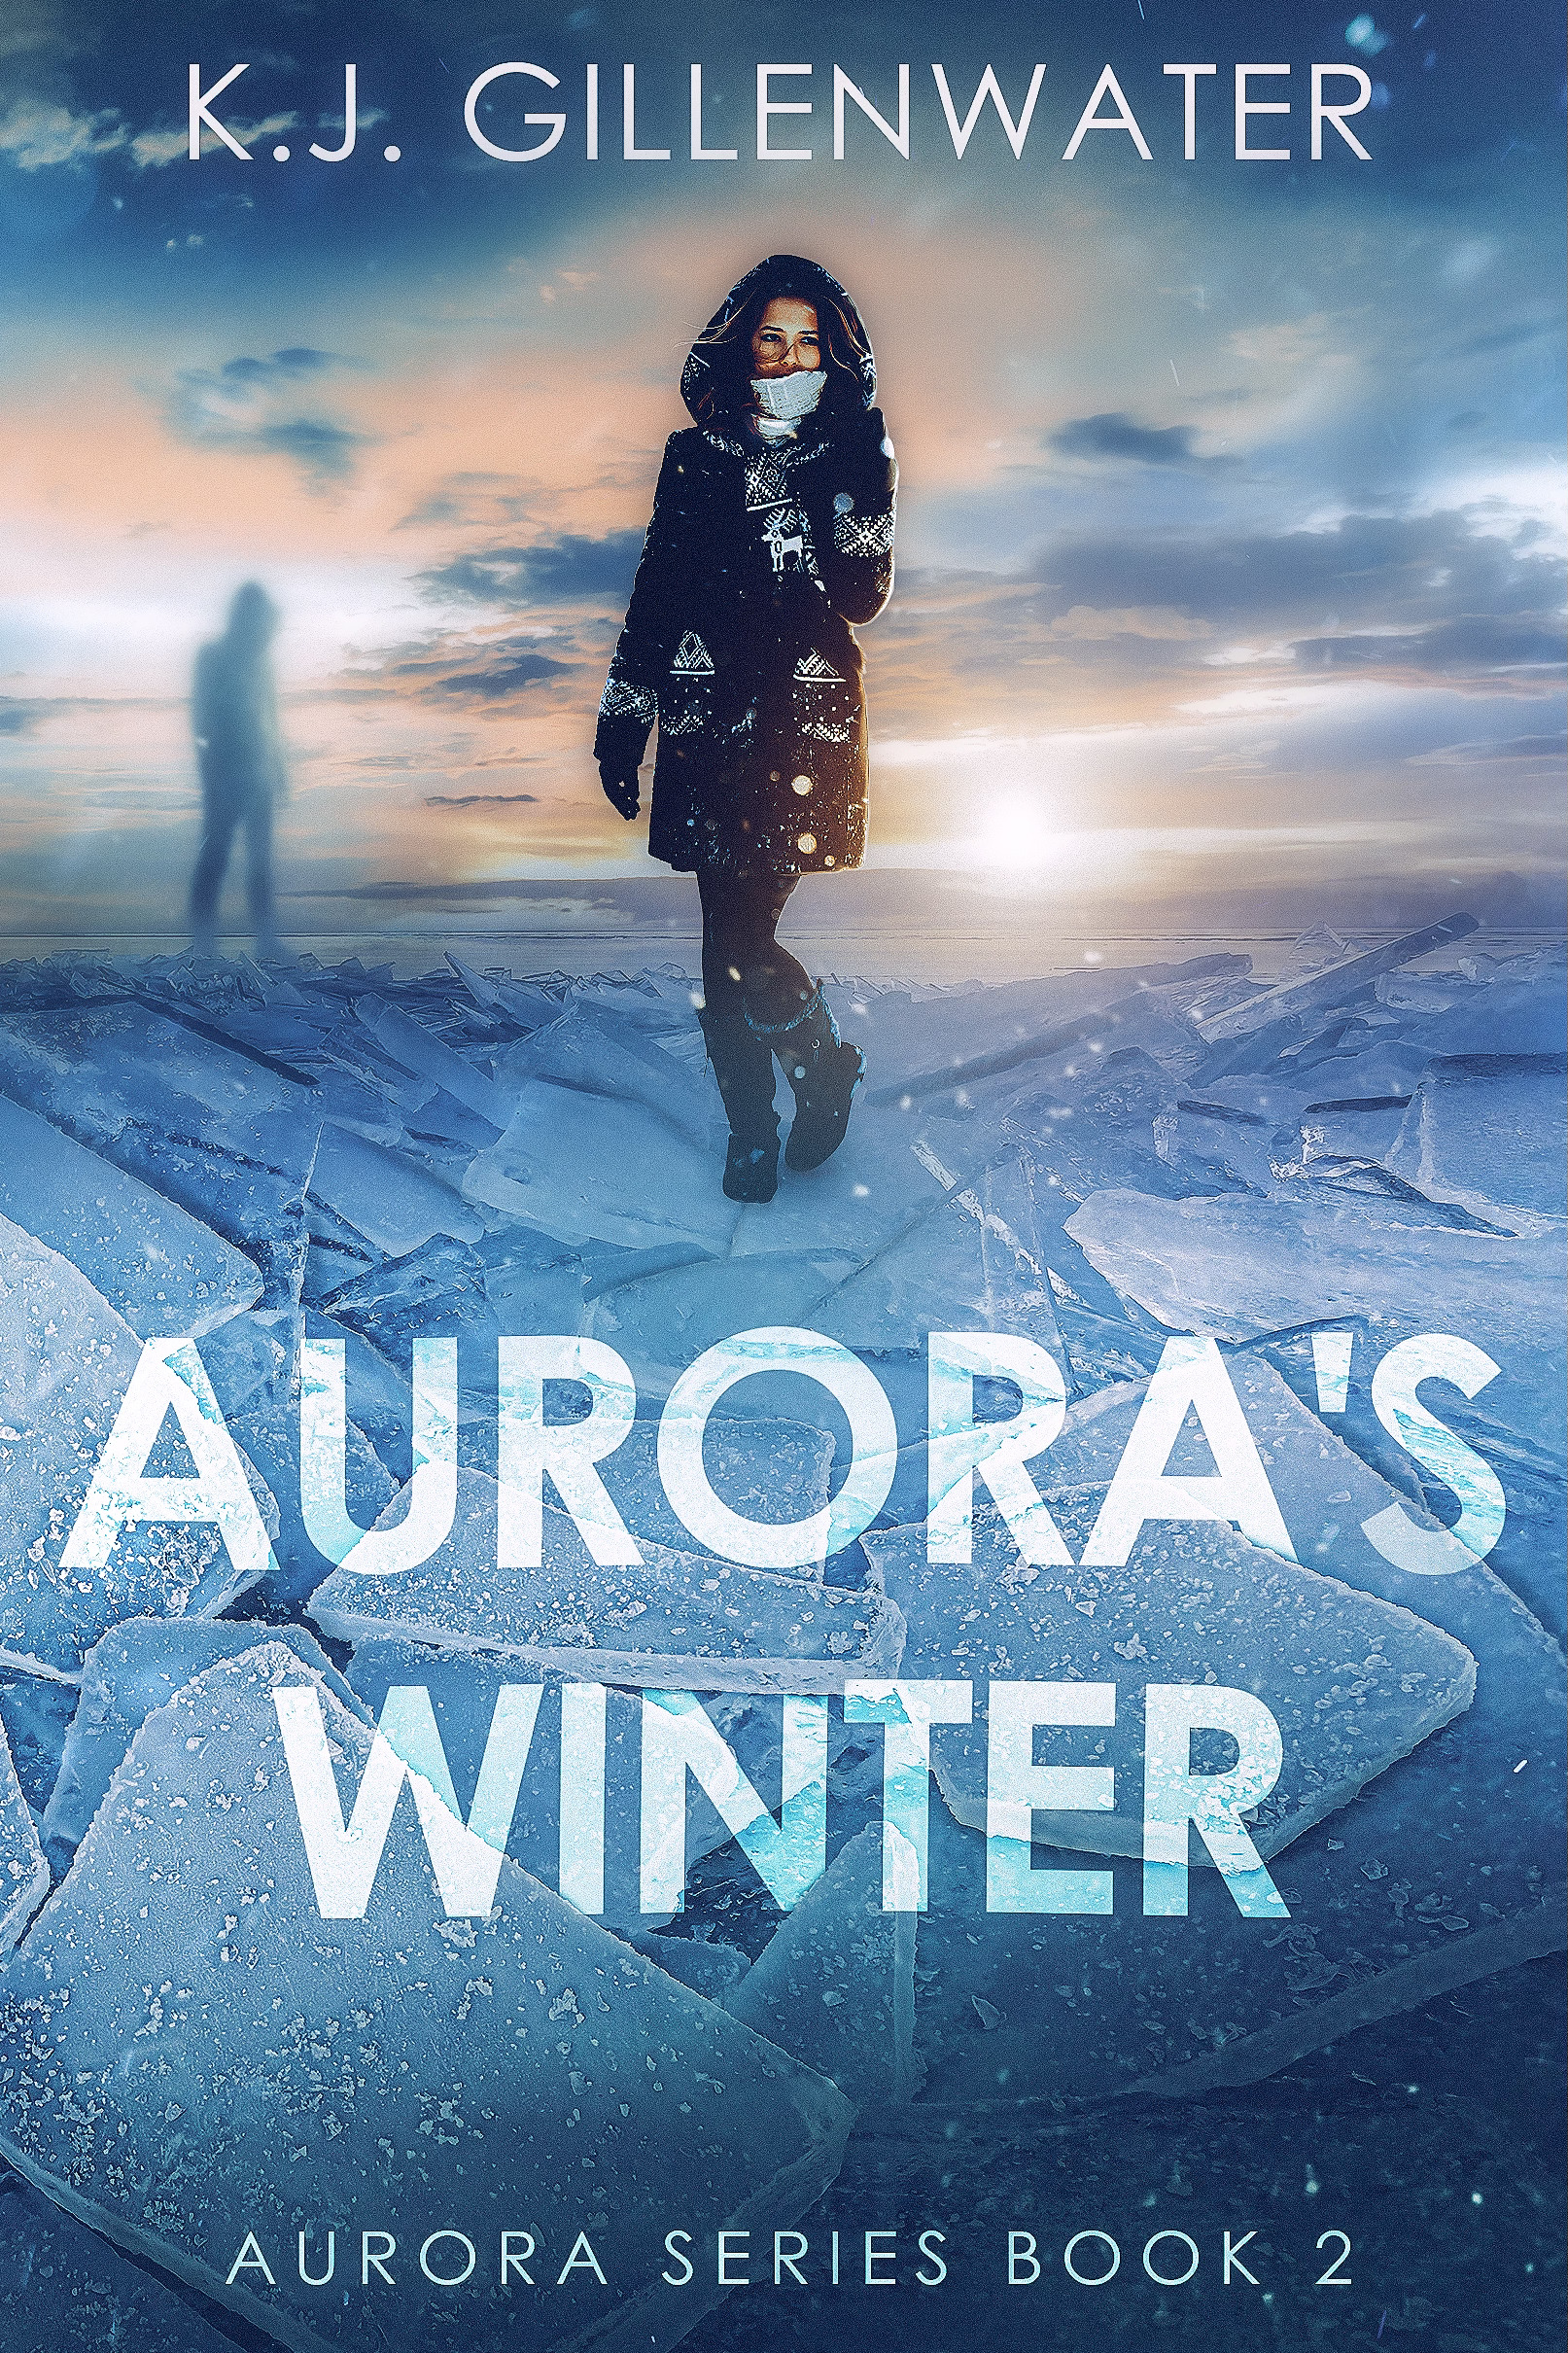 A person walking on ice with the words aurora 's winter written in front of them.